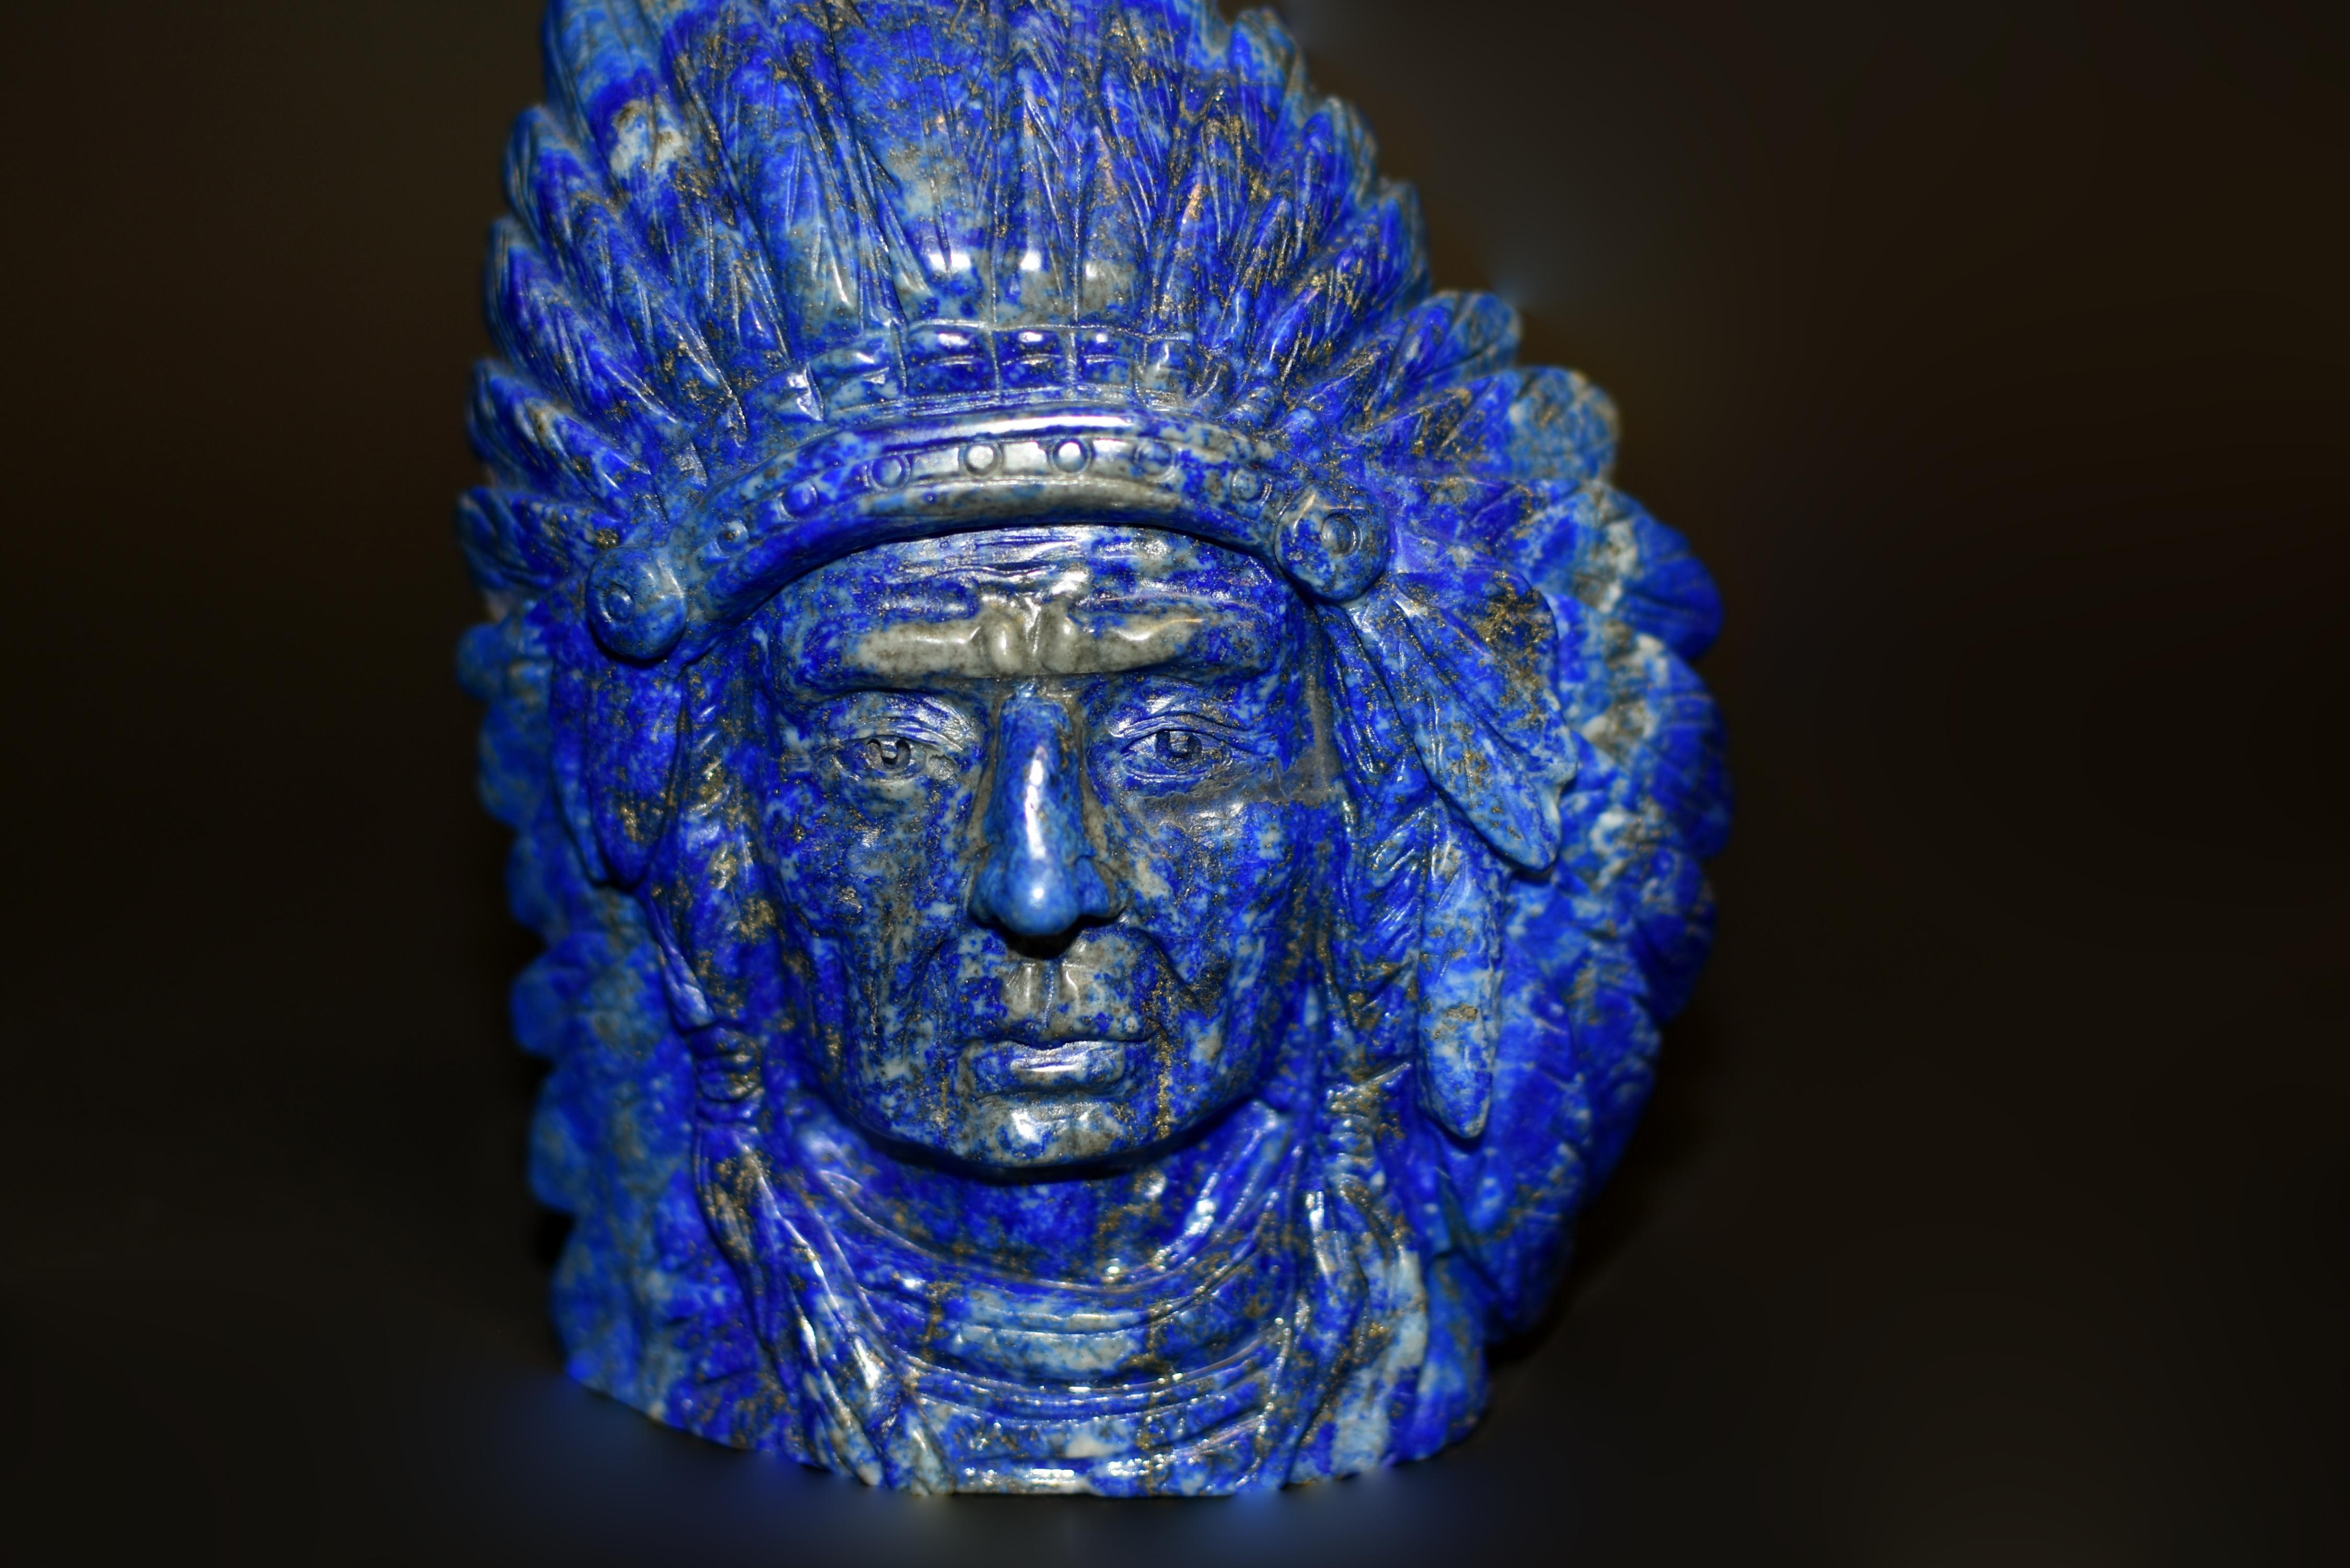 We discovered, and through extraordinary efforts acquired this rare lapis lazuli Indian chief statue, capturing the essence of a Native American leader adorned in his magnificent feathered headdress. Crafted with meticulous attention to detail, the